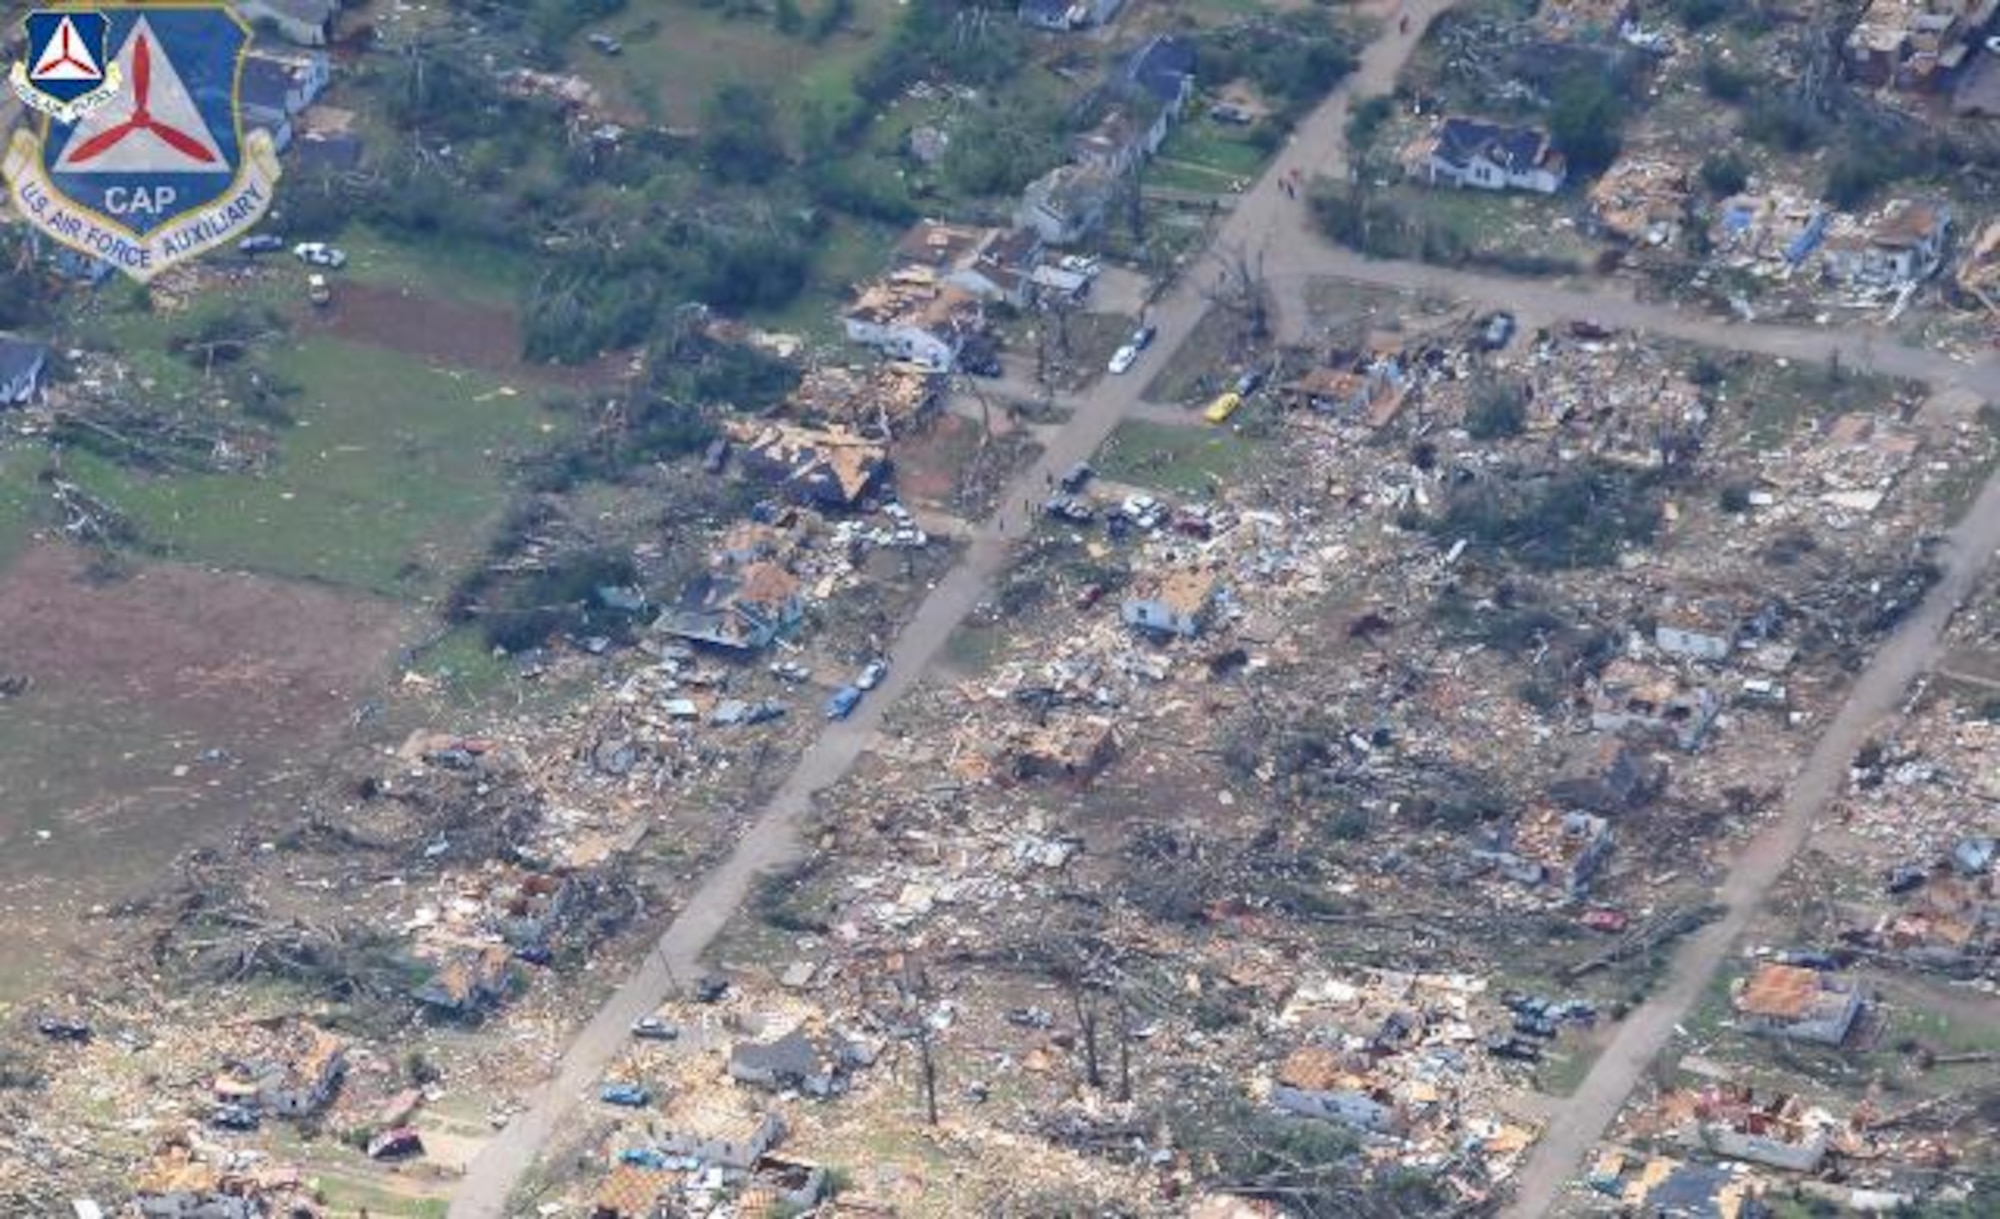 The Civil Air Patrol, flying as the Air Force Auxiliary, took this image in Tuscaloosa County in Alabama April 29. Tornadoes devastated the Southeast April 27, killing more than 300 people and causing extensive property damage. The AFAUX is flying in support of first responders and state and local officials as they assess the damage to the region. (Courtesy photo)